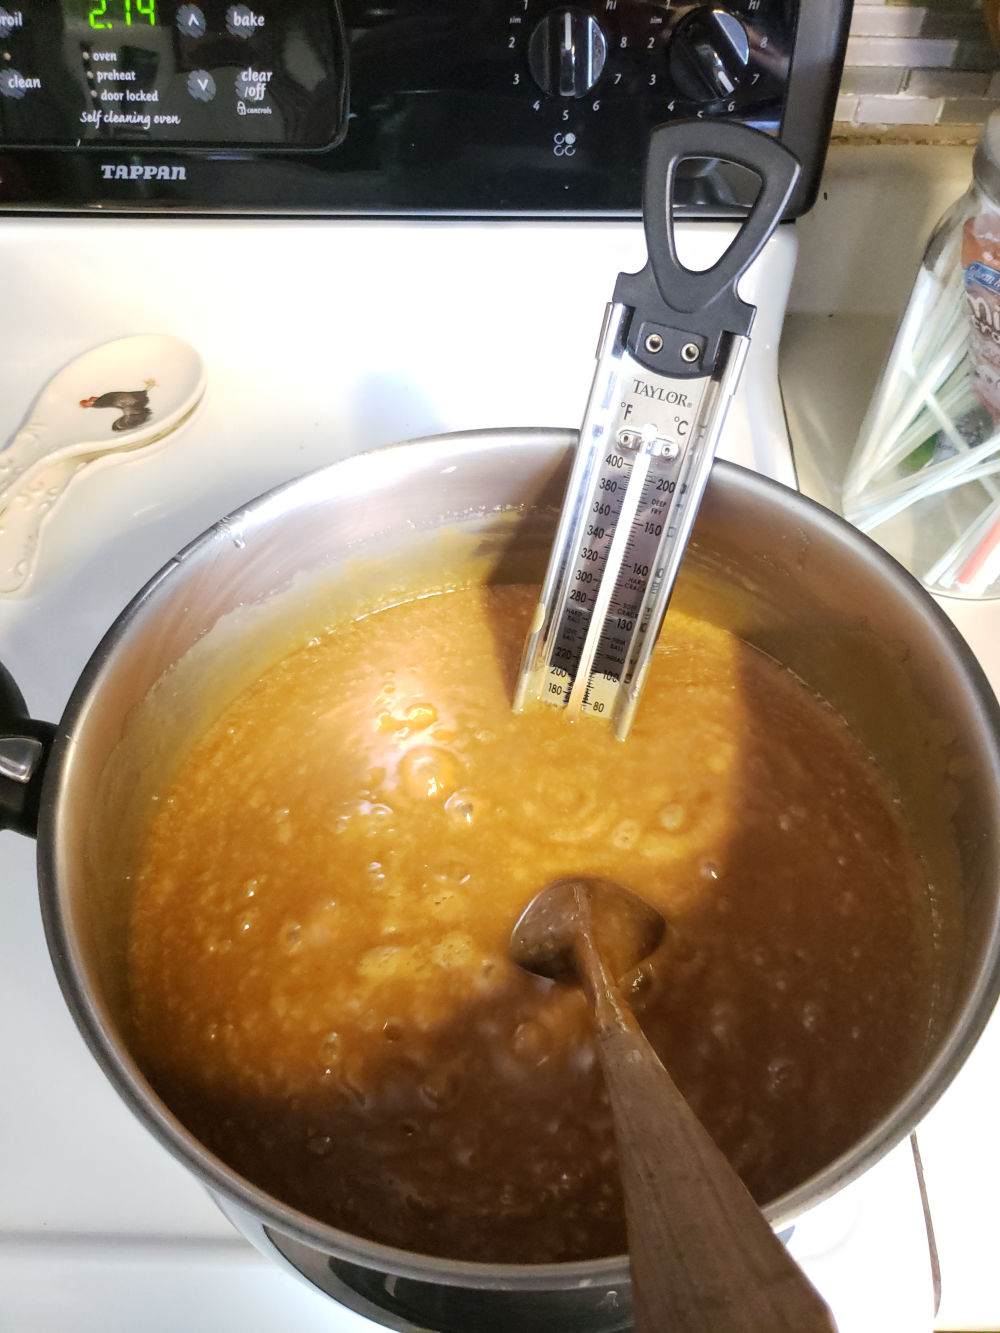 homemade caramel in a pot on a kitchen stove with a candy thermometer in the pot measuring the temperature